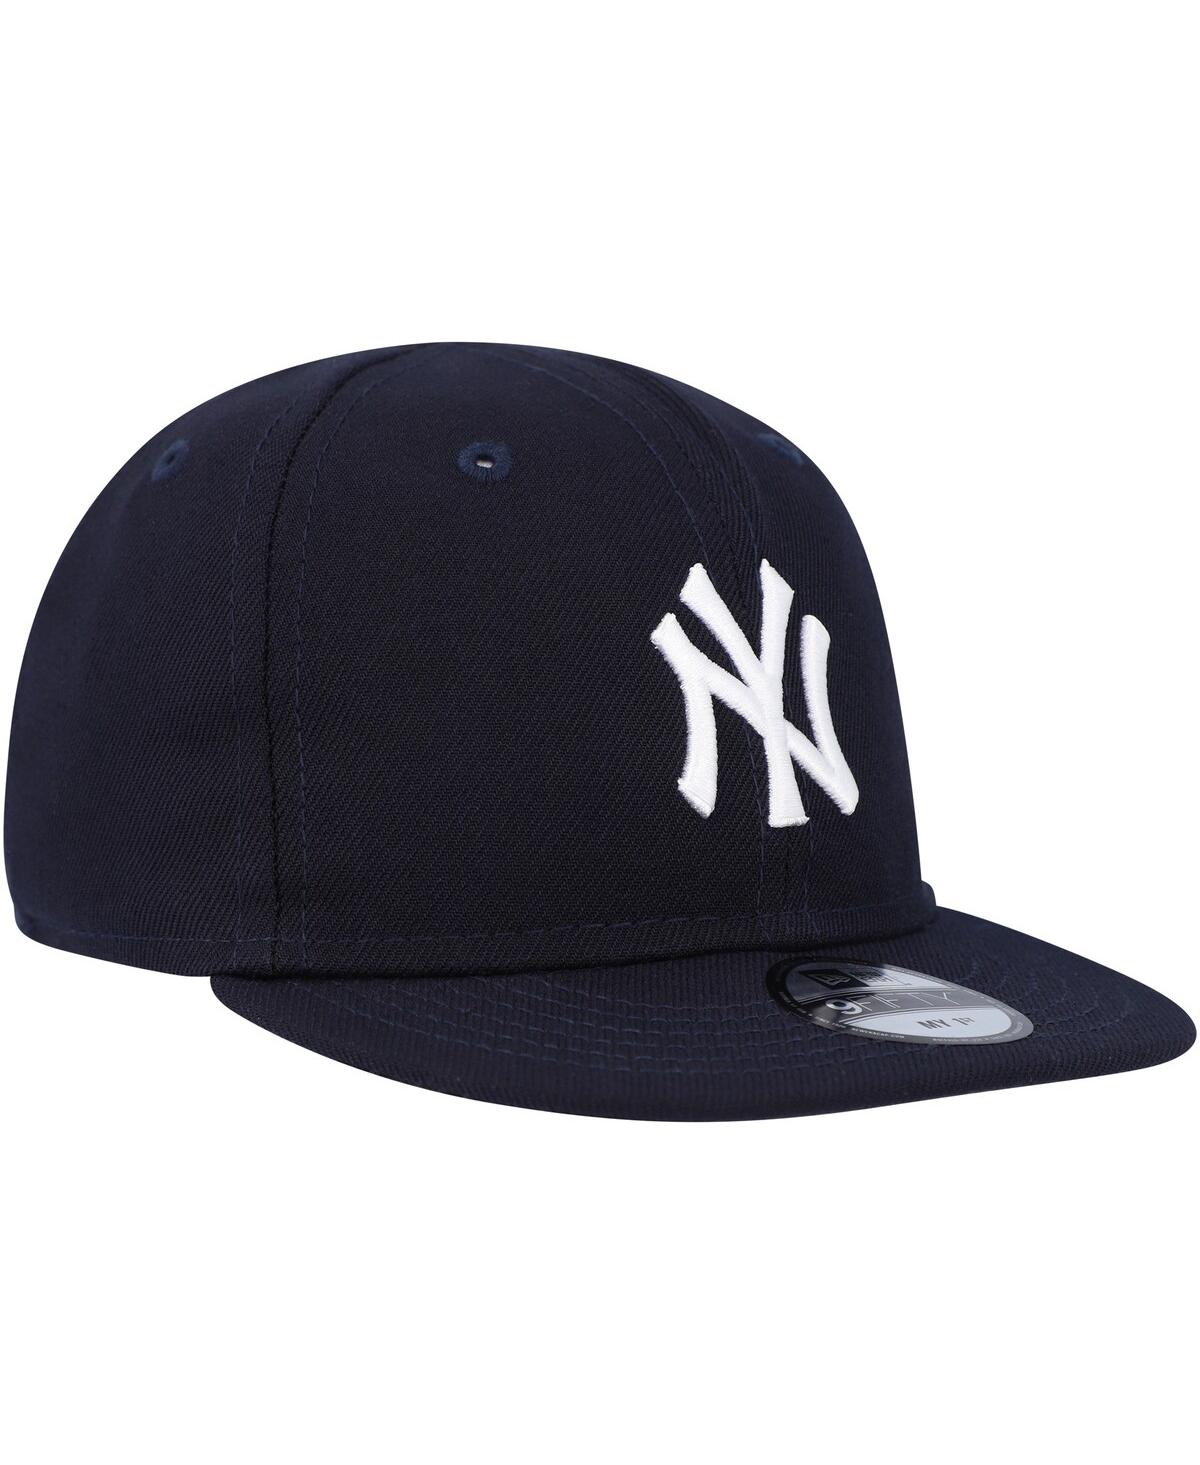 Shop New Era Infant Boys And Girls  Navy New York Yankees My First 9fifty Adjustable Hat